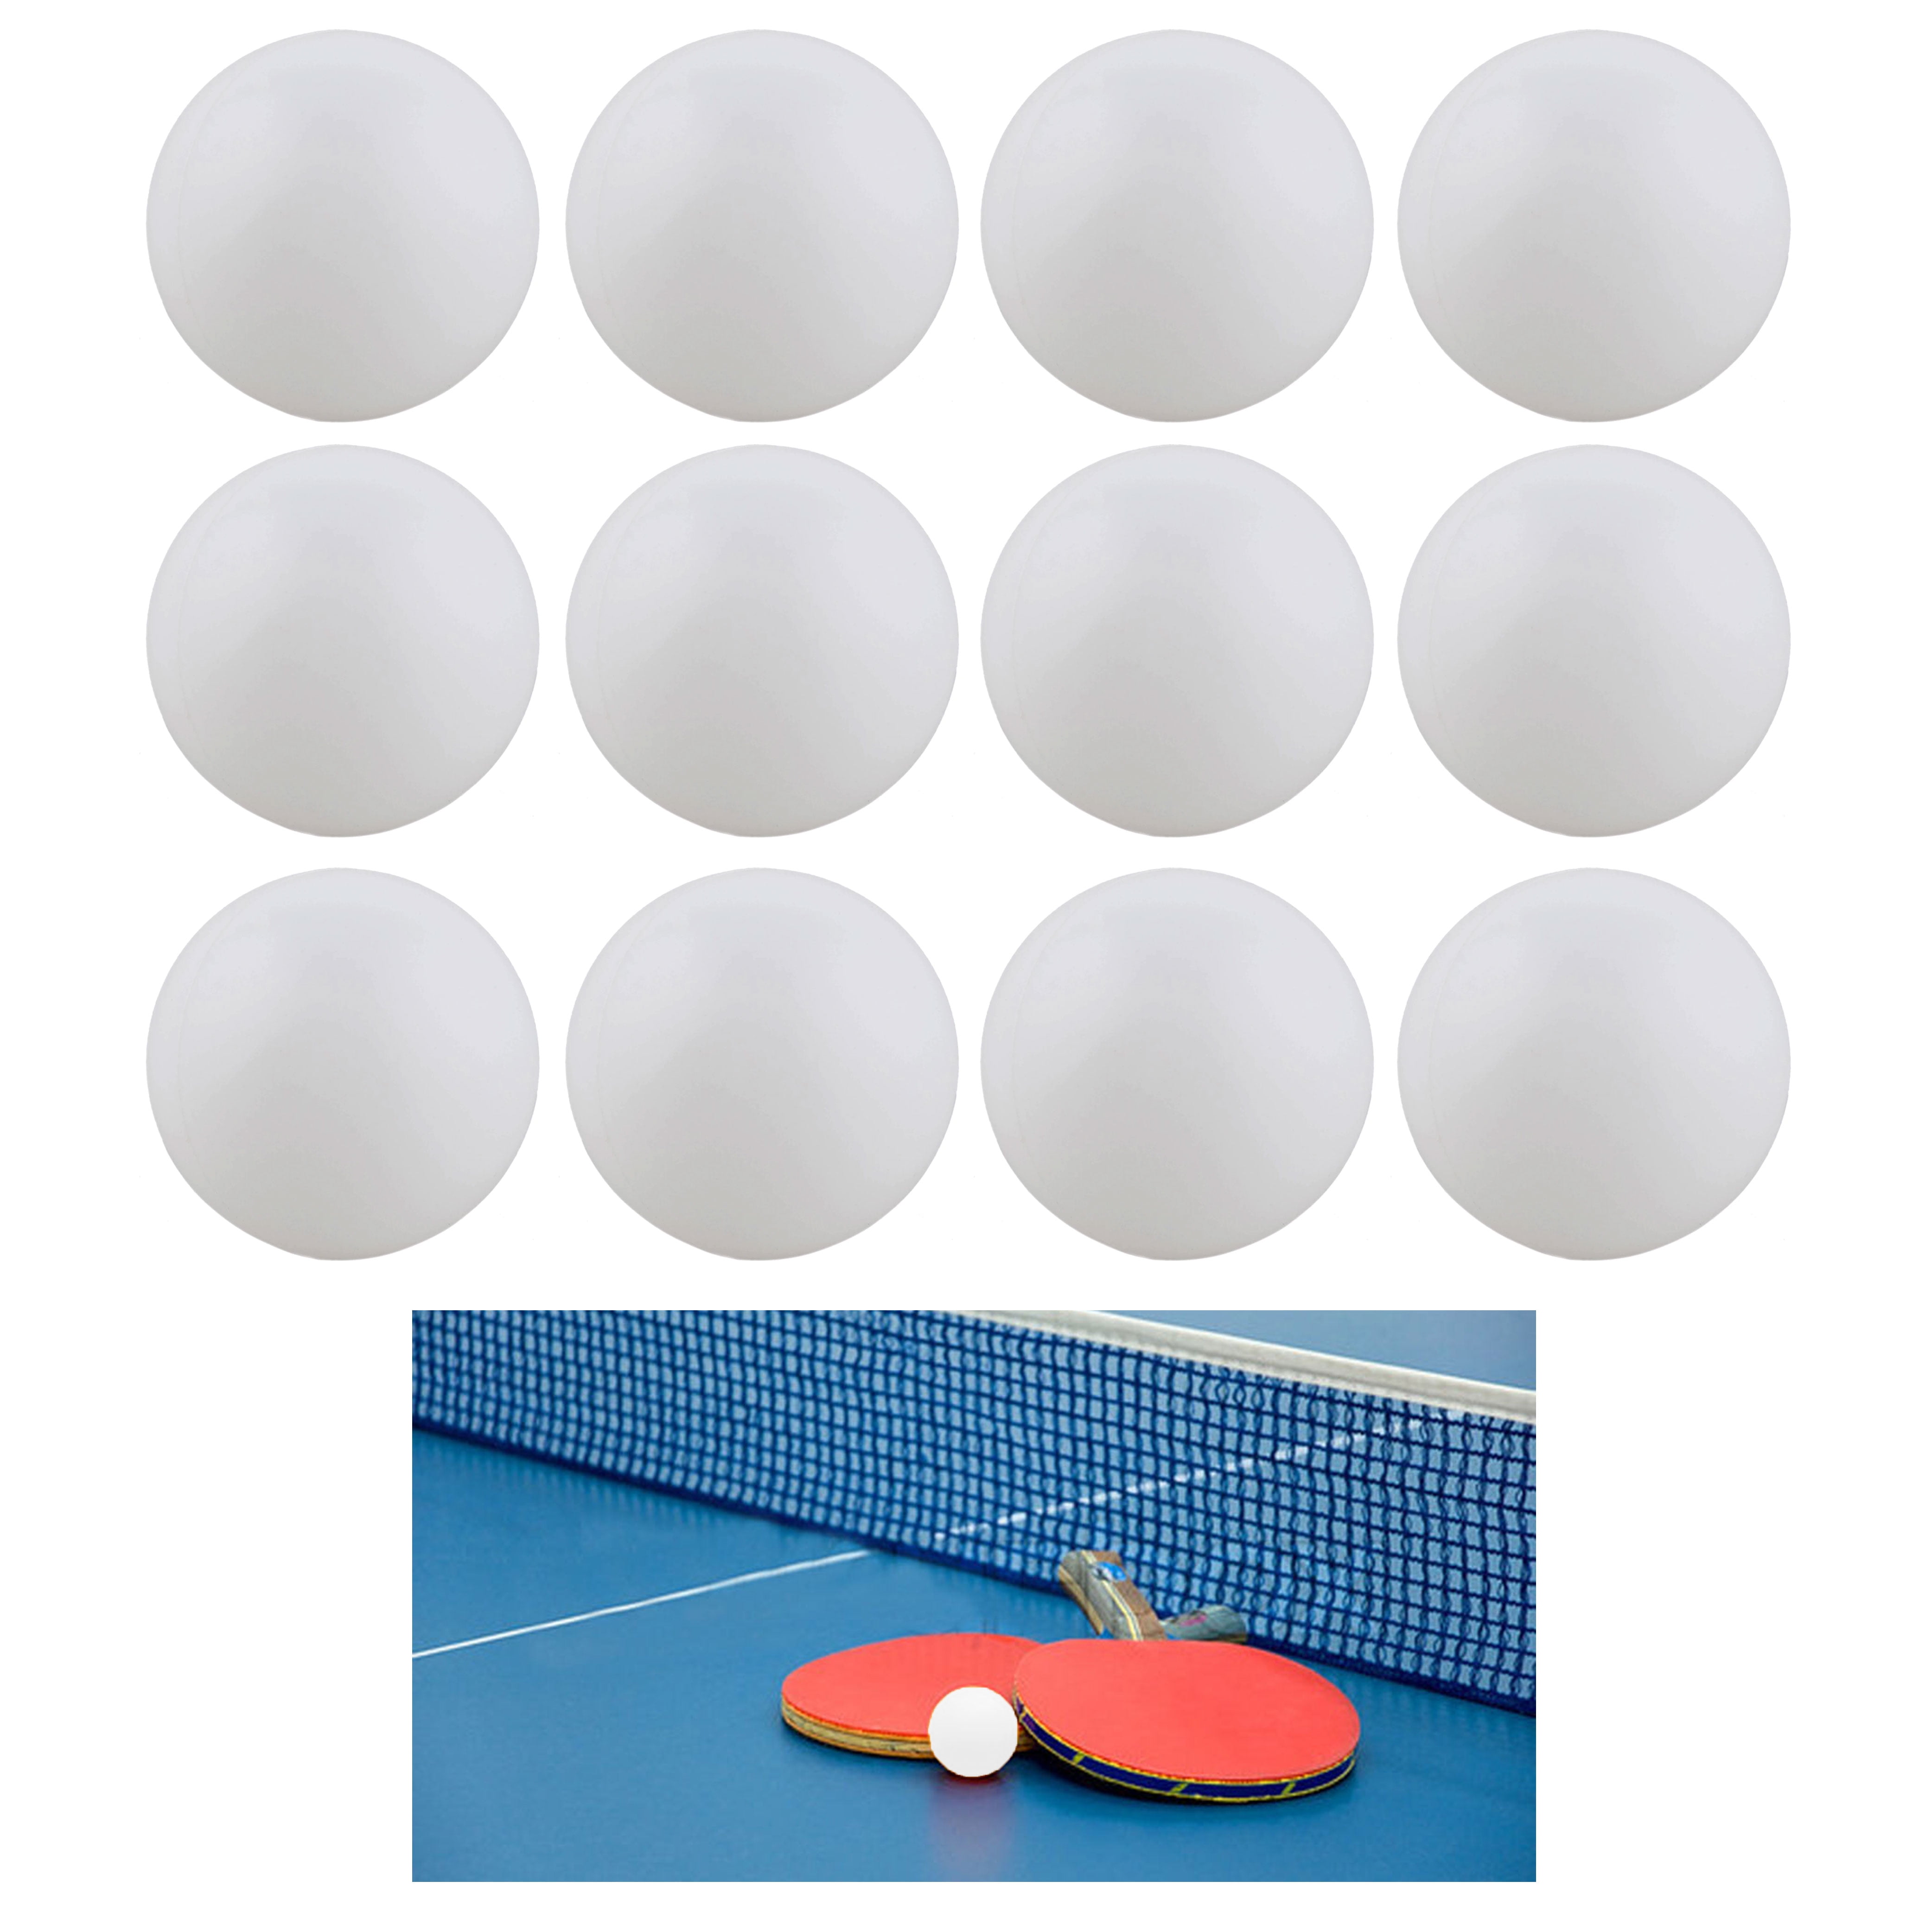 Professional Table Tennis Balls Training Ping Pong Brand New Pack of 12 